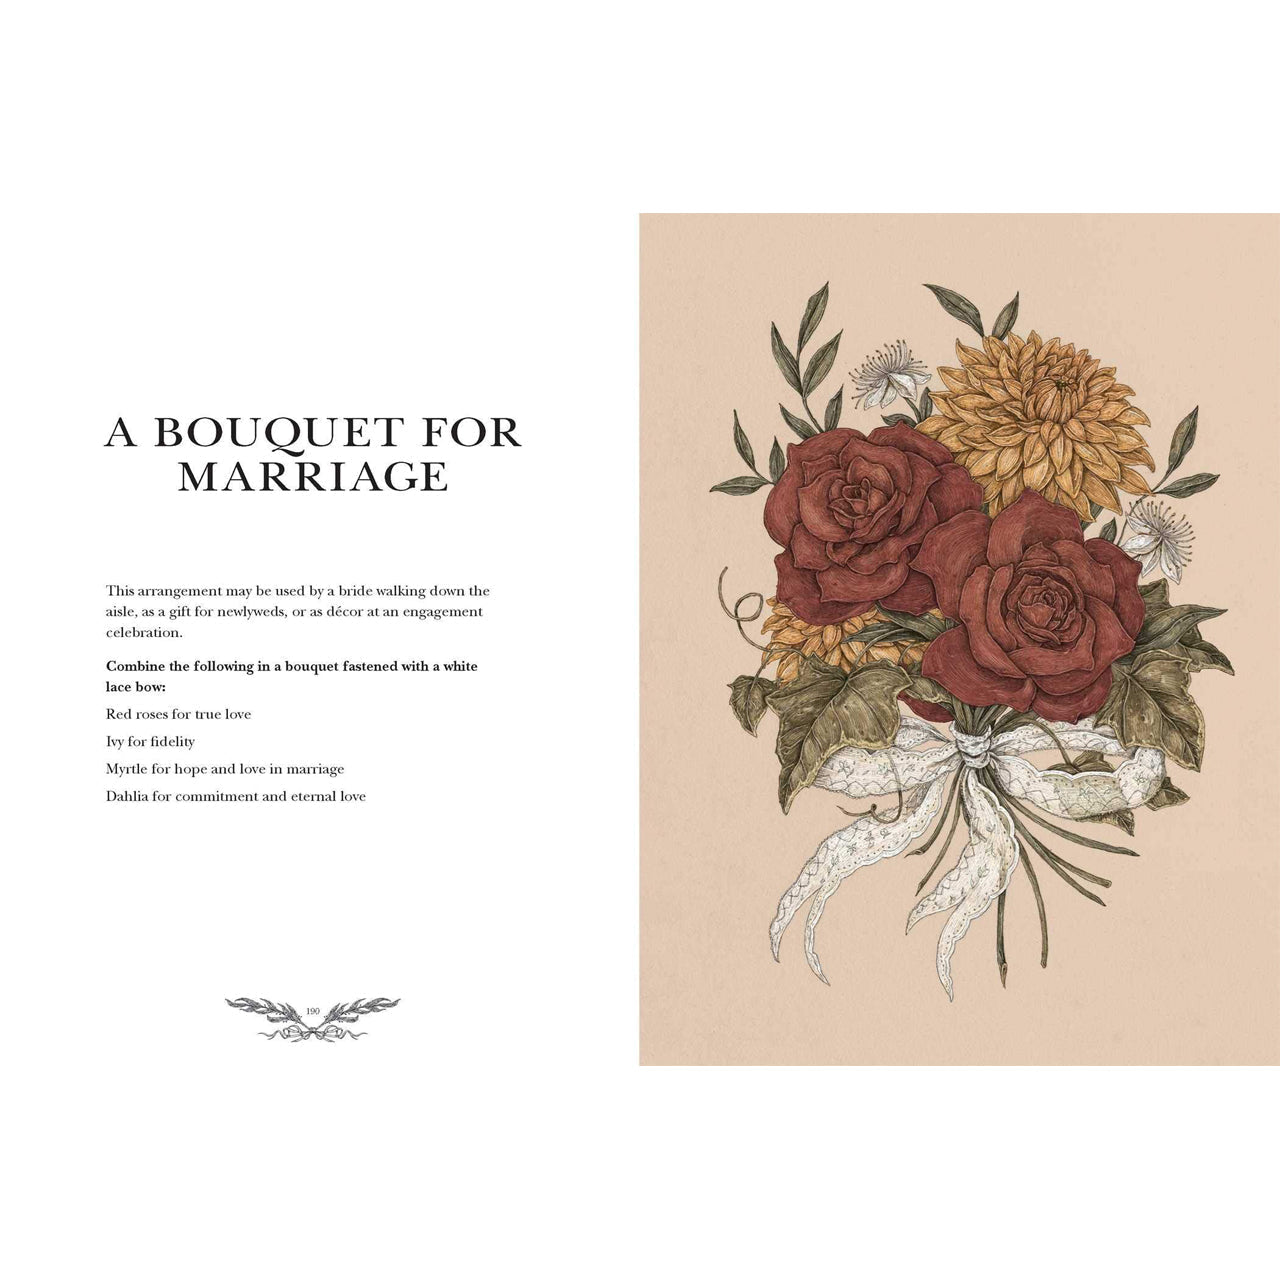 Floriography. An Illustrated Guide to the Victorian Language of Flowers by Jessica Roux Glyndebourne Shop